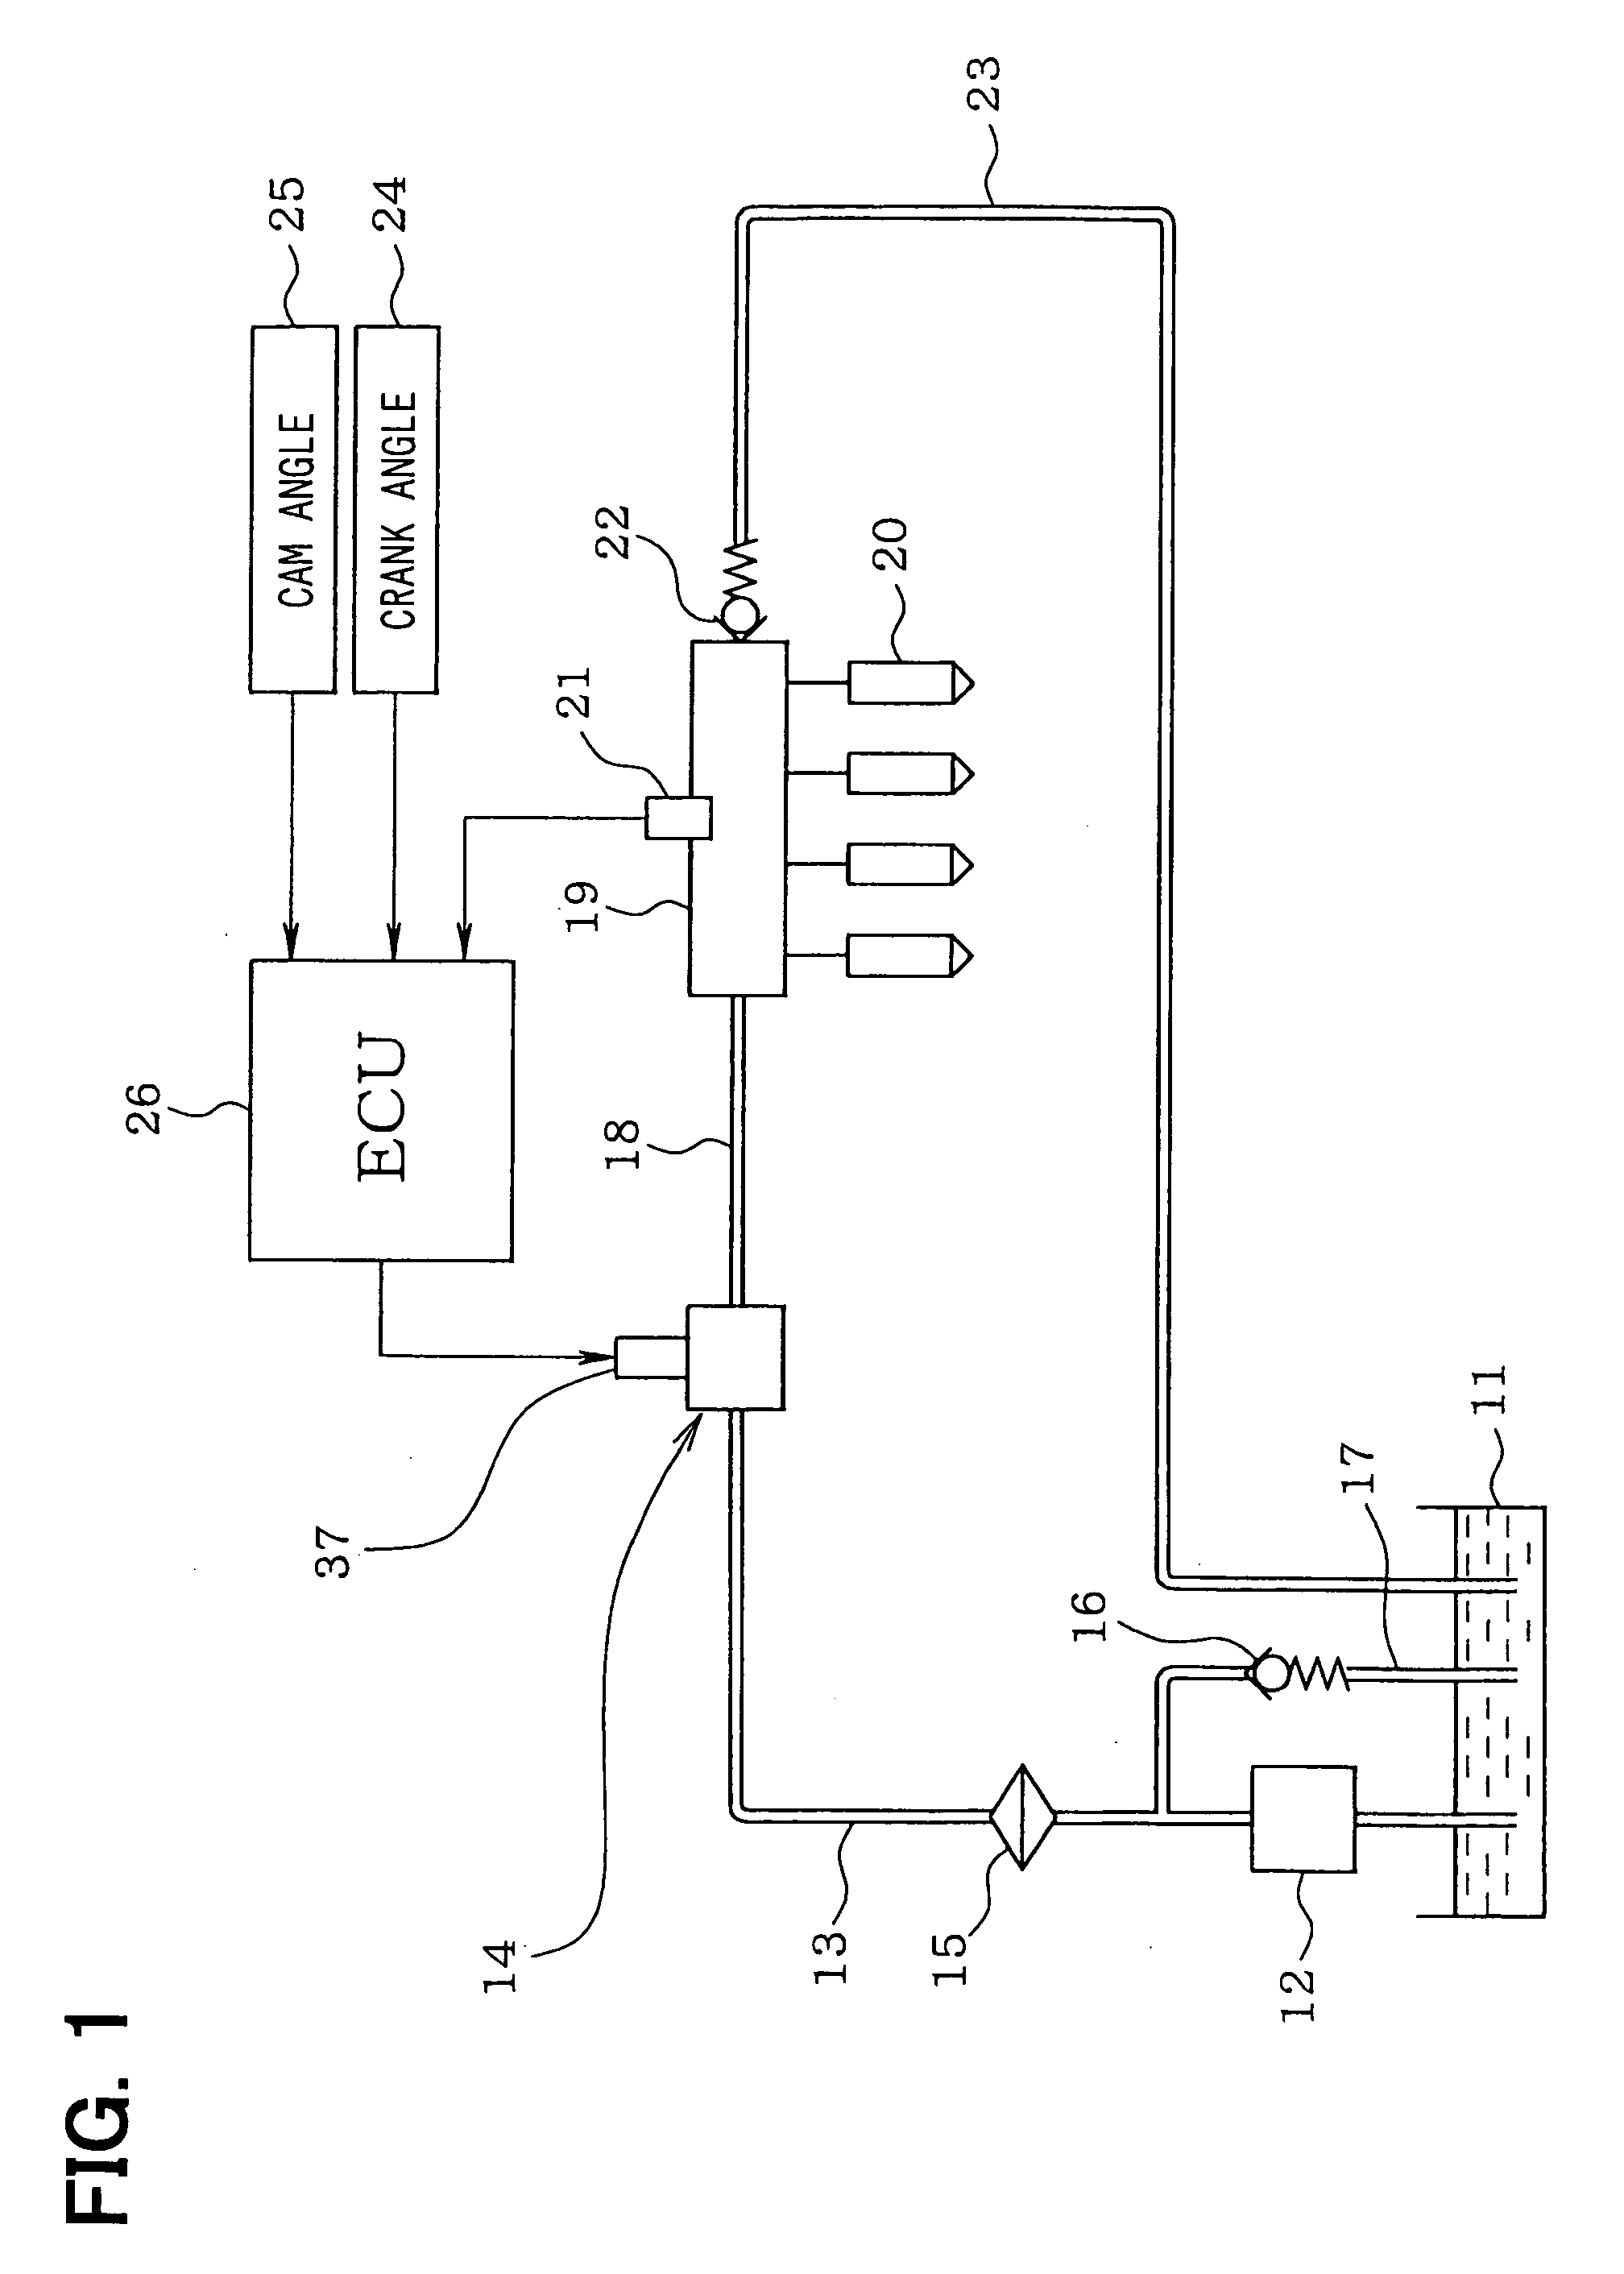 Fuel supply system of internal combustion engine